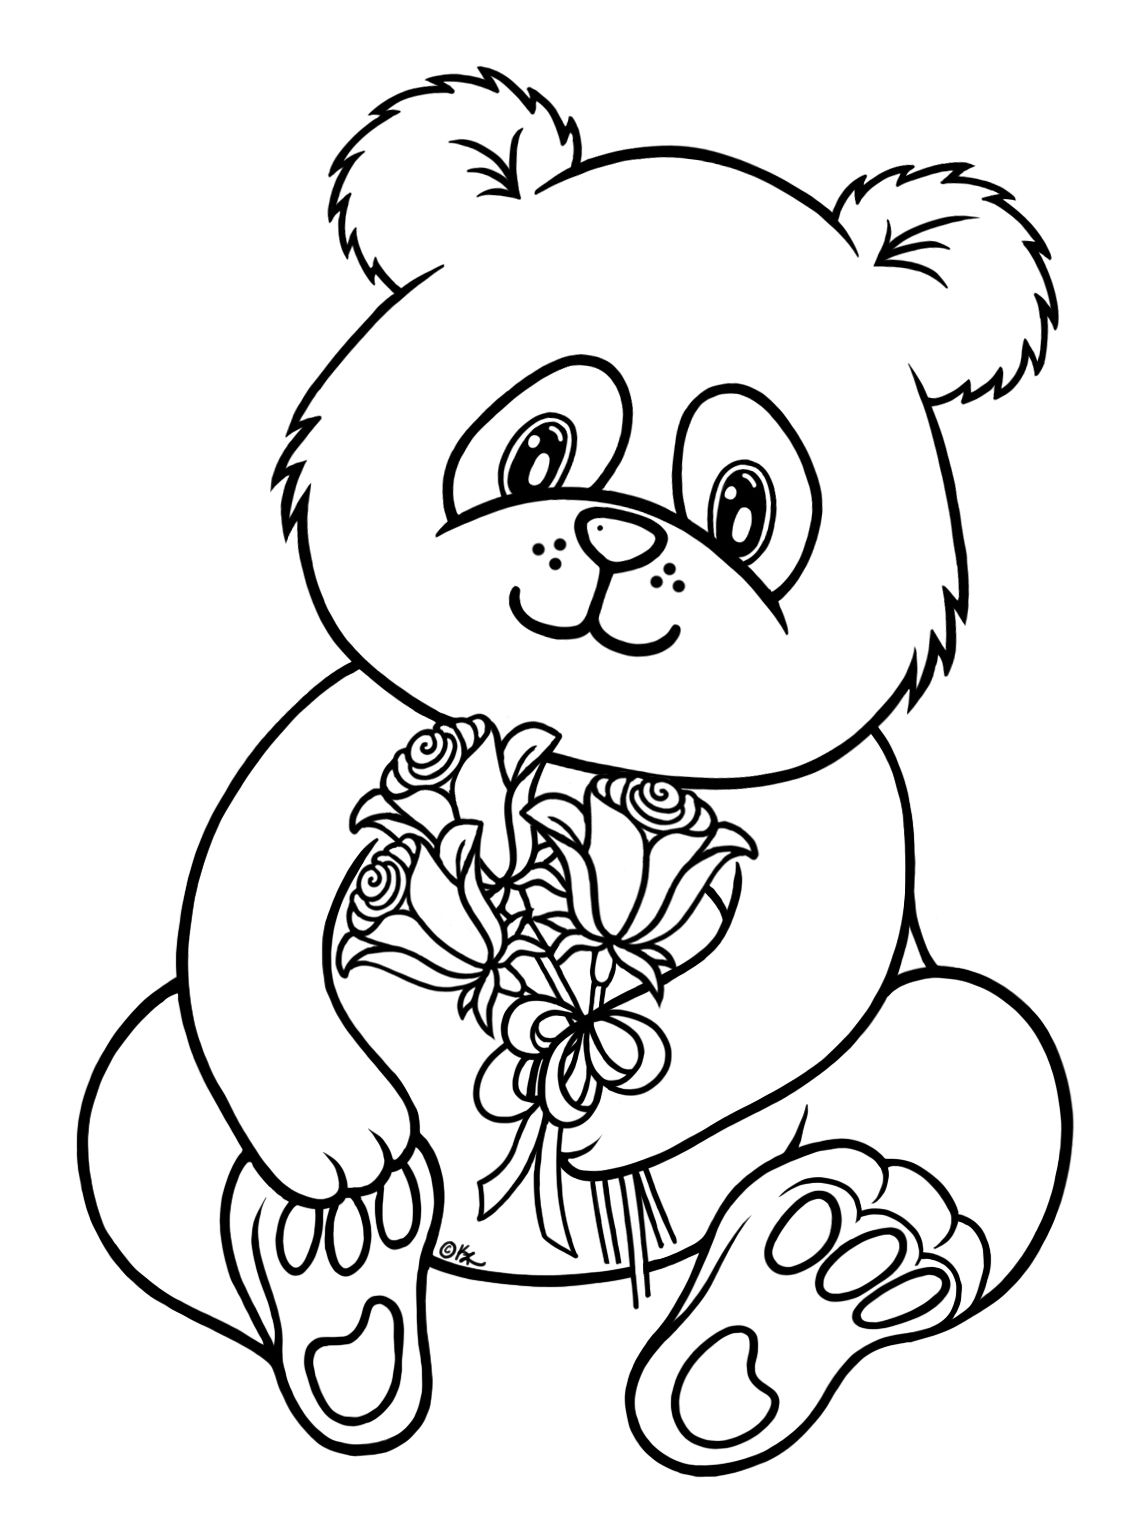 Free Printable Panda Coloring Pages For Kids - Animal Place